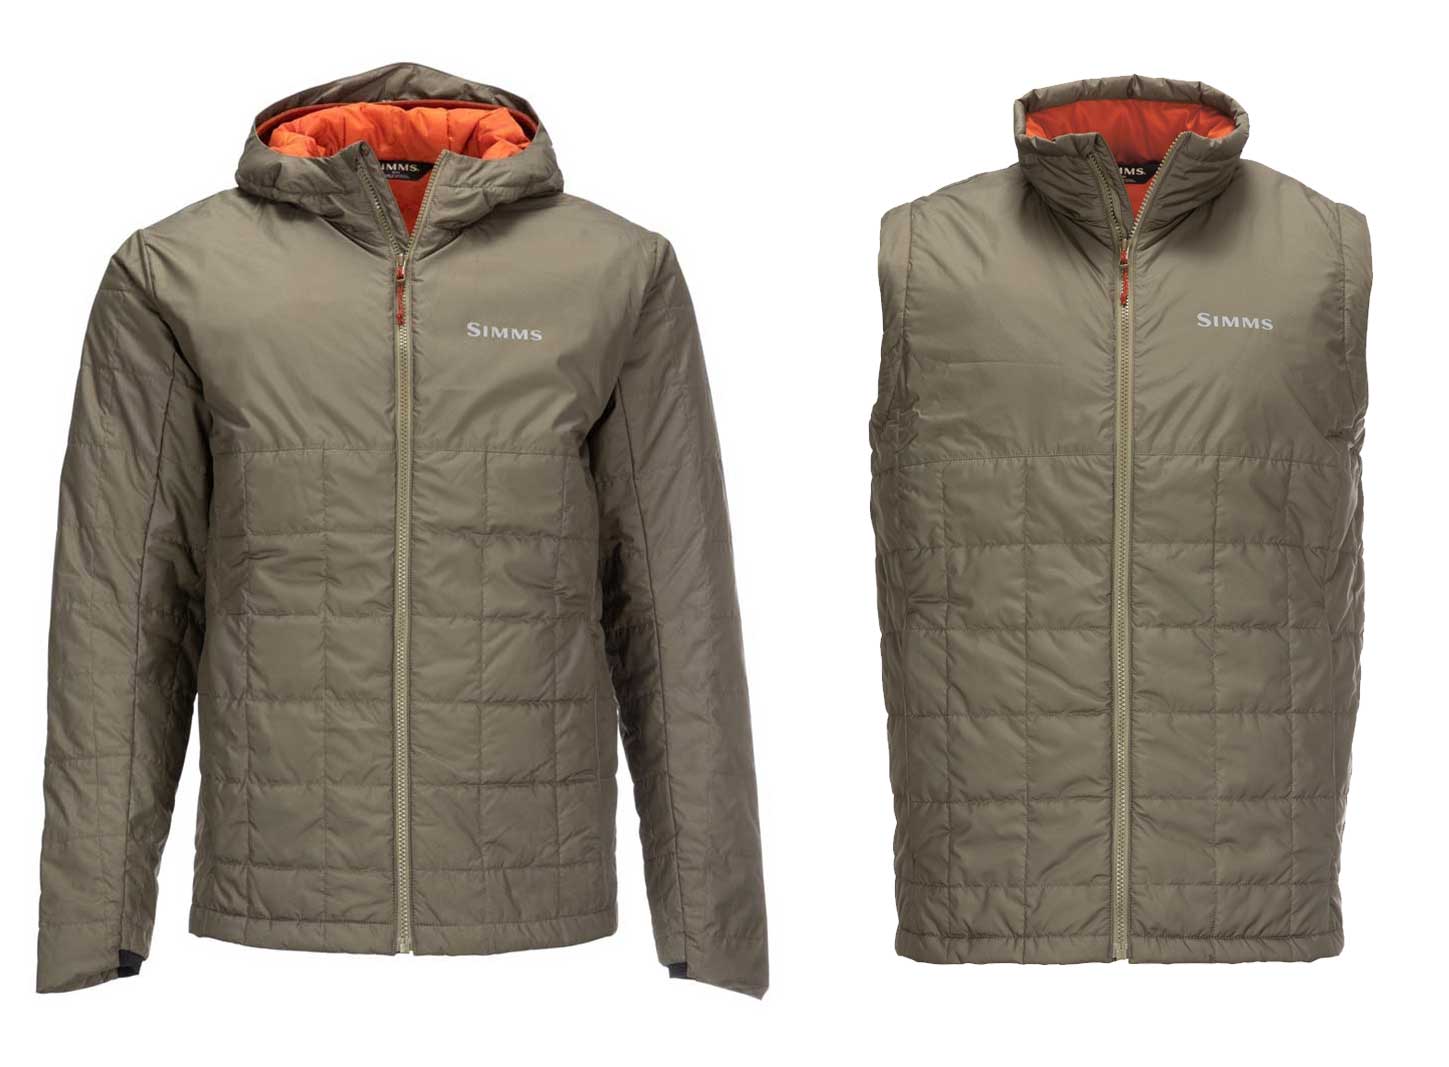 Simms Fall Run Insulated Hoody and Vest